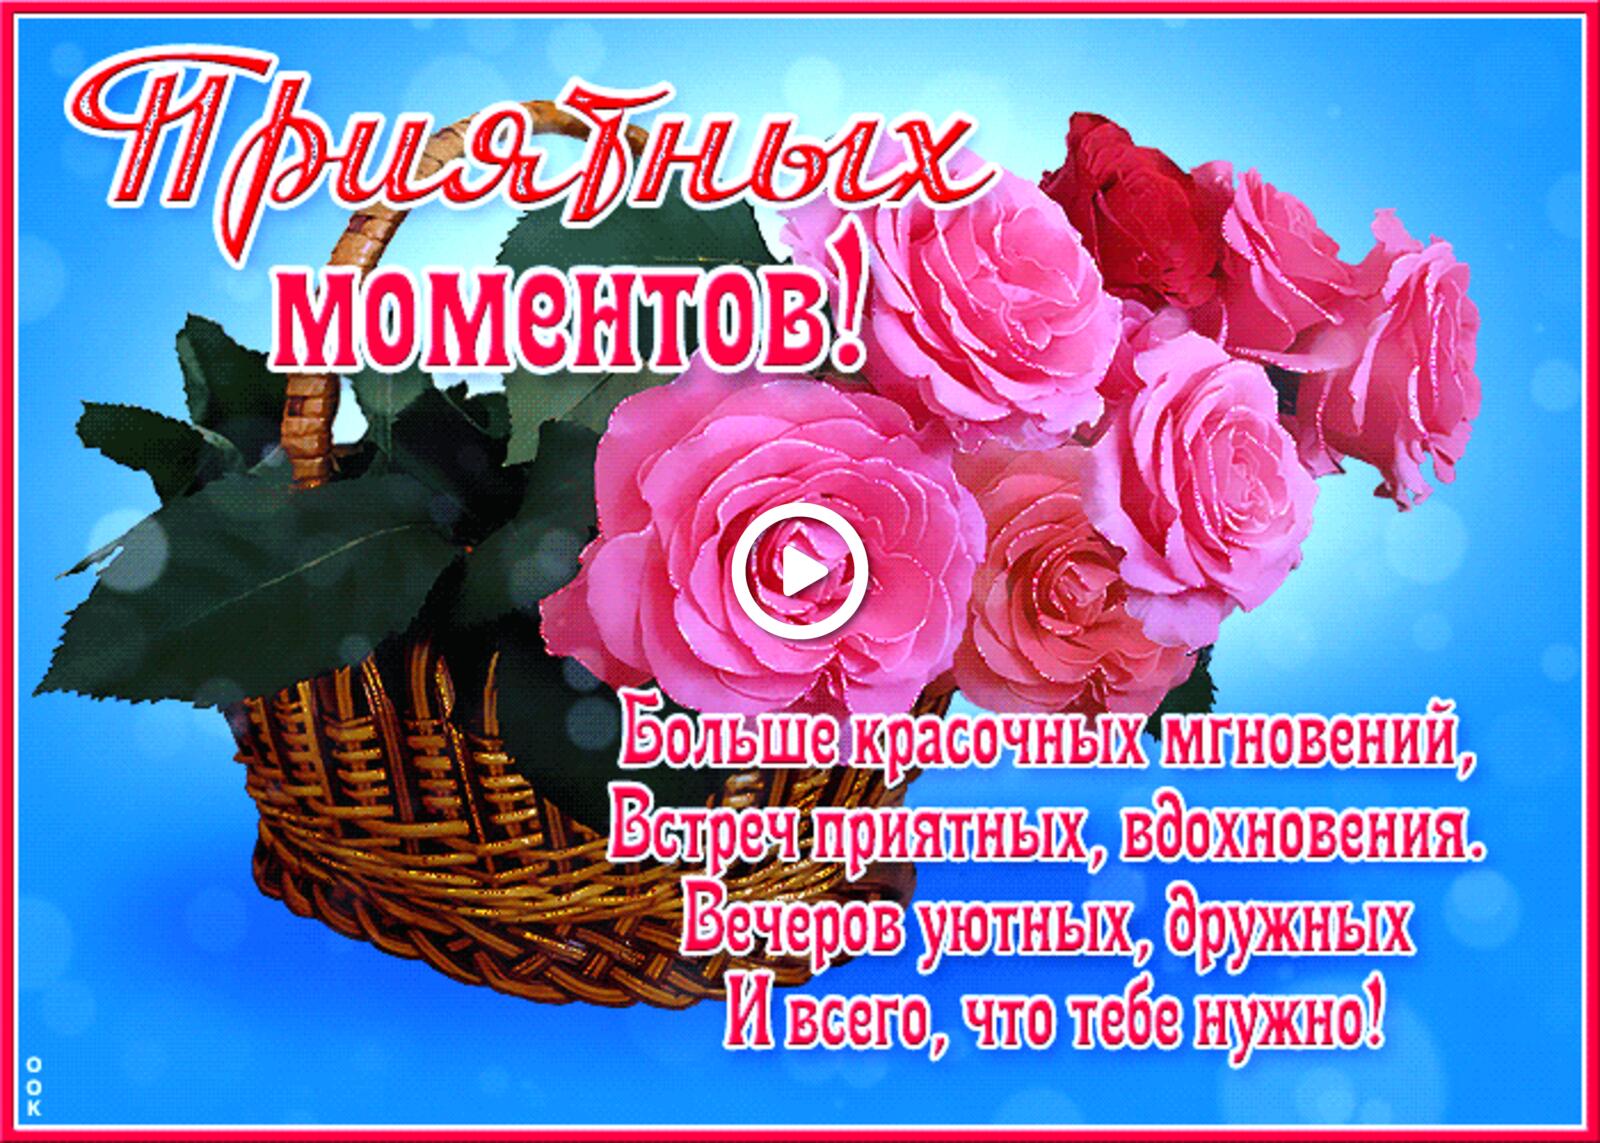 A postcard on the subject of shiny picture with flowers pink roses nice moments for free